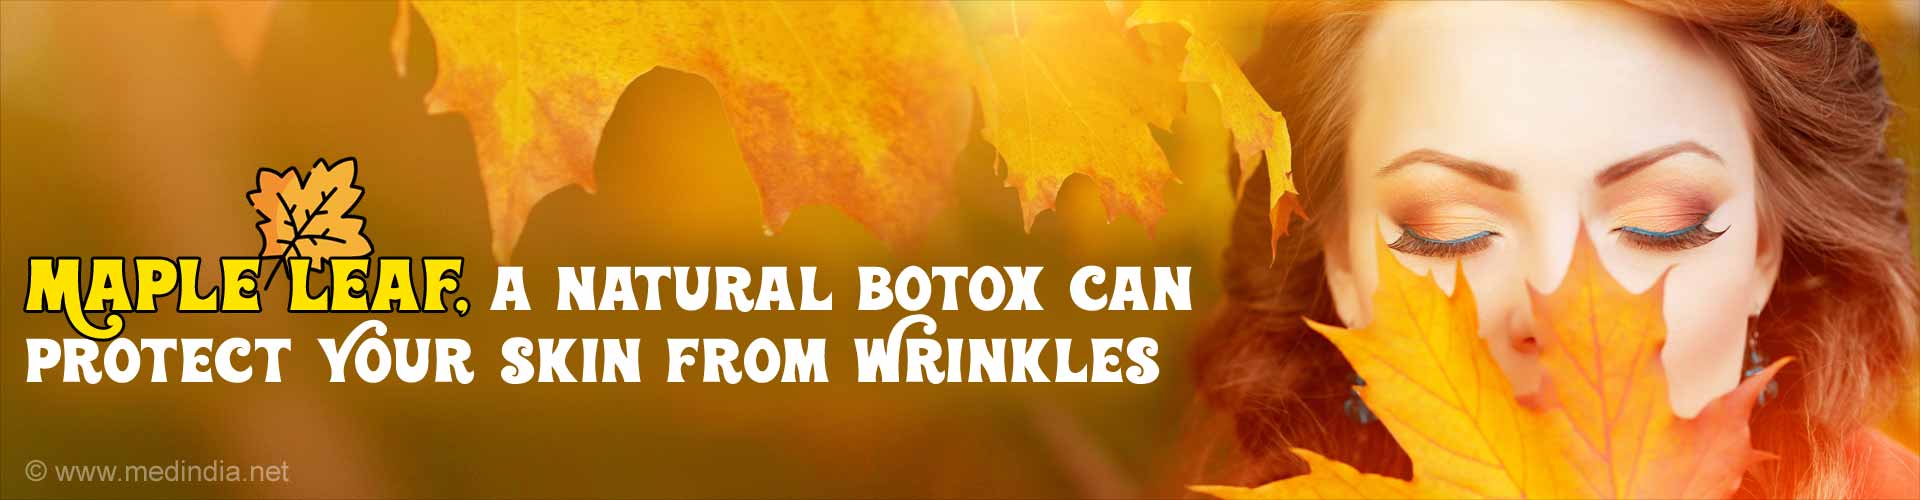 Maple leaf, a natural Botox can protect your skin from wrinkles.
